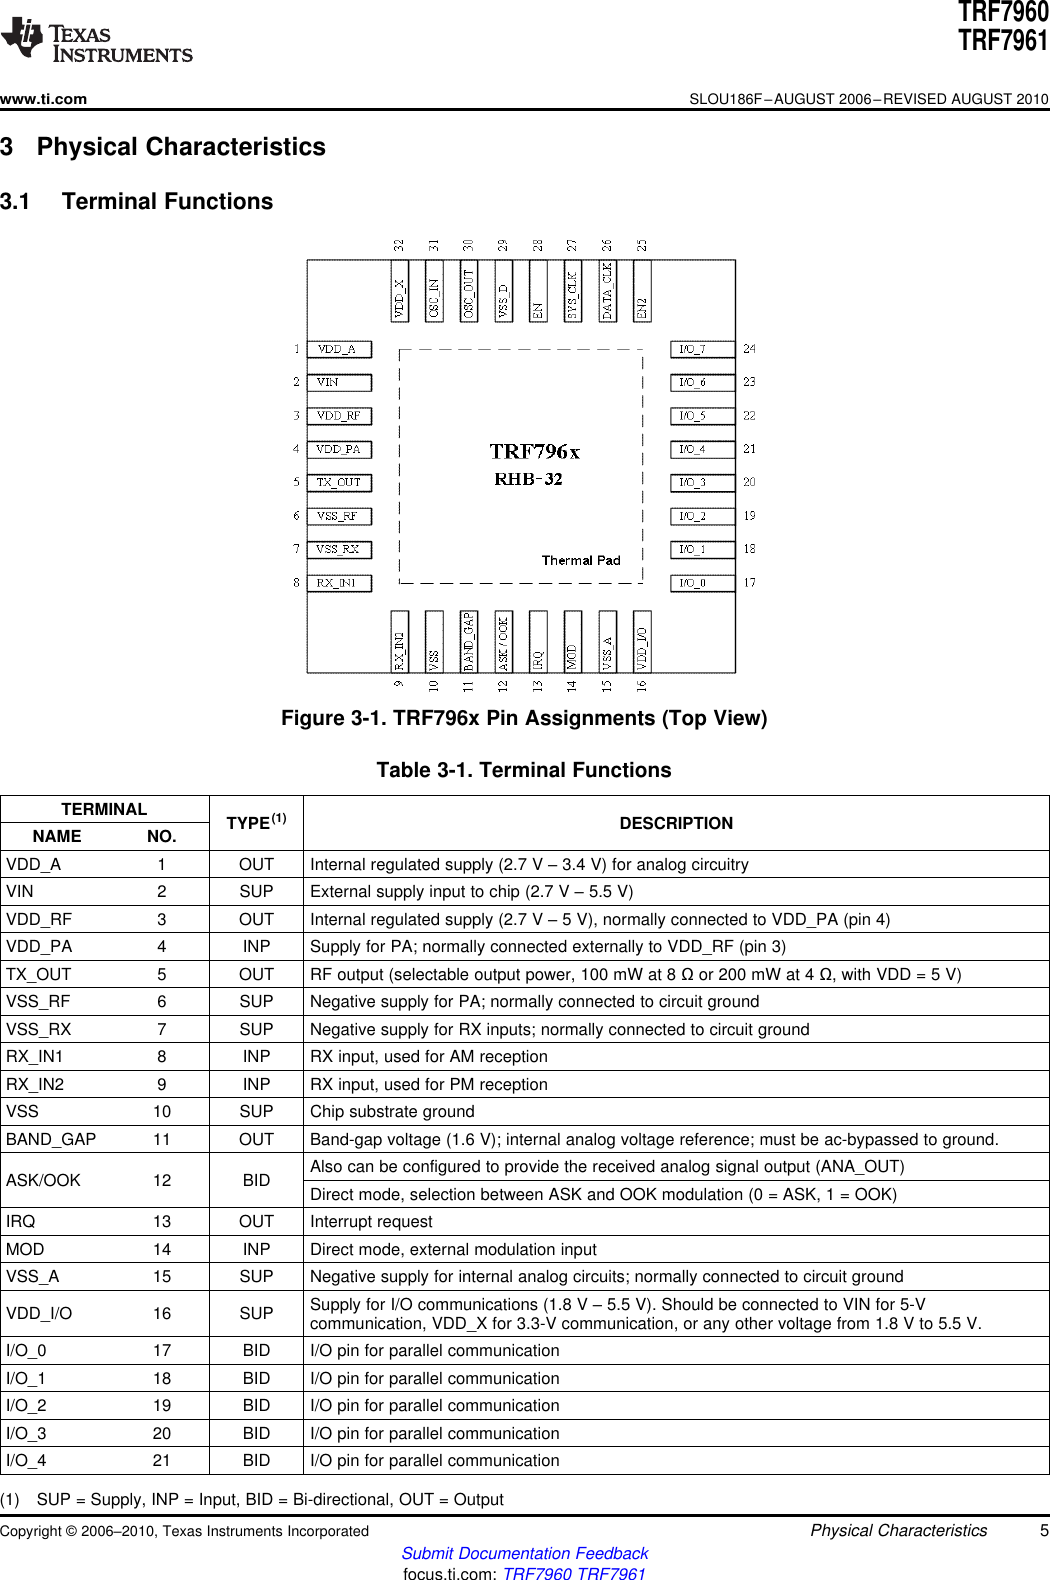 TRF7960TRF7961www.ti.comSLOU186F–AUGUST 2006–REVISED AUGUST 20103 Physical Characteristics3.1 Terminal FunctionsFigure 3-1. TRF796x Pin Assignments (Top View)Table 3-1. Terminal FunctionsTERMINAL TYPE(1) DESCRIPTIONNAME NO.VDD_A 1 OUT Internal regulated supply (2.7 V –3.4 V) for analog circuitryVIN 2 SUP External supply input to chip (2.7 V –5.5 V)VDD_RF 3 OUT Internal regulated supply (2.7 V –5 V), normally connected to VDD_PA (pin 4)VDD_PA 4 INP Supply for PA; normally connected externally to VDD_RF (pin 3)TX_OUT 5 OUT RF output (selectable output power, 100 mW at 8 Ωor 200 mW at 4 Ω, with VDD = 5 V)VSS_RF 6 SUP Negative supply for PA; normally connected to circuit groundVSS_RX 7 SUP Negative supply for RX inputs; normally connected to circuit groundRX_IN1 8 INP RX input, used for AM receptionRX_IN2 9 INP RX input, used for PM receptionVSS 10 SUP Chip substrate groundBAND_GAP 11 OUT Band-gap voltage (1.6 V); internal analog voltage reference; must be ac-bypassed to ground.Also can be configured to provide the received analog signal output (ANA_OUT)ASK/OOK 12 BID Direct mode, selection between ASK and OOK modulation (0 = ASK, 1 = OOK)IRQ 13 OUT Interrupt requestMOD 14 INP Direct mode, external modulation inputVSS_A 15 SUP Negative supply for internal analog circuits; normally connected to circuit groundSupply for I/O communications (1.8 V –5.5 V). Should be connected to VIN for 5-VVDD_I/O 16 SUP communication, VDD_X for 3.3-V communication, or any other voltage from 1.8 V to 5.5 V.I/O_0 17 BID I/O pin for parallel communicationI/O_1 18 BID I/O pin for parallel communicationI/O_2 19 BID I/O pin for parallel communicationI/O_3 20 BID I/O pin for parallel communicationI/O_4 21 BID I/O pin for parallel communication(1) SUP = Supply, INP = Input, BID = Bi-directional, OUT = OutputCopyright ©2006–2010, Texas Instruments Incorporated Physical Characteristics 5Submit Documentation Feedbackfocus.ti.com: TRF7960 TRF7961